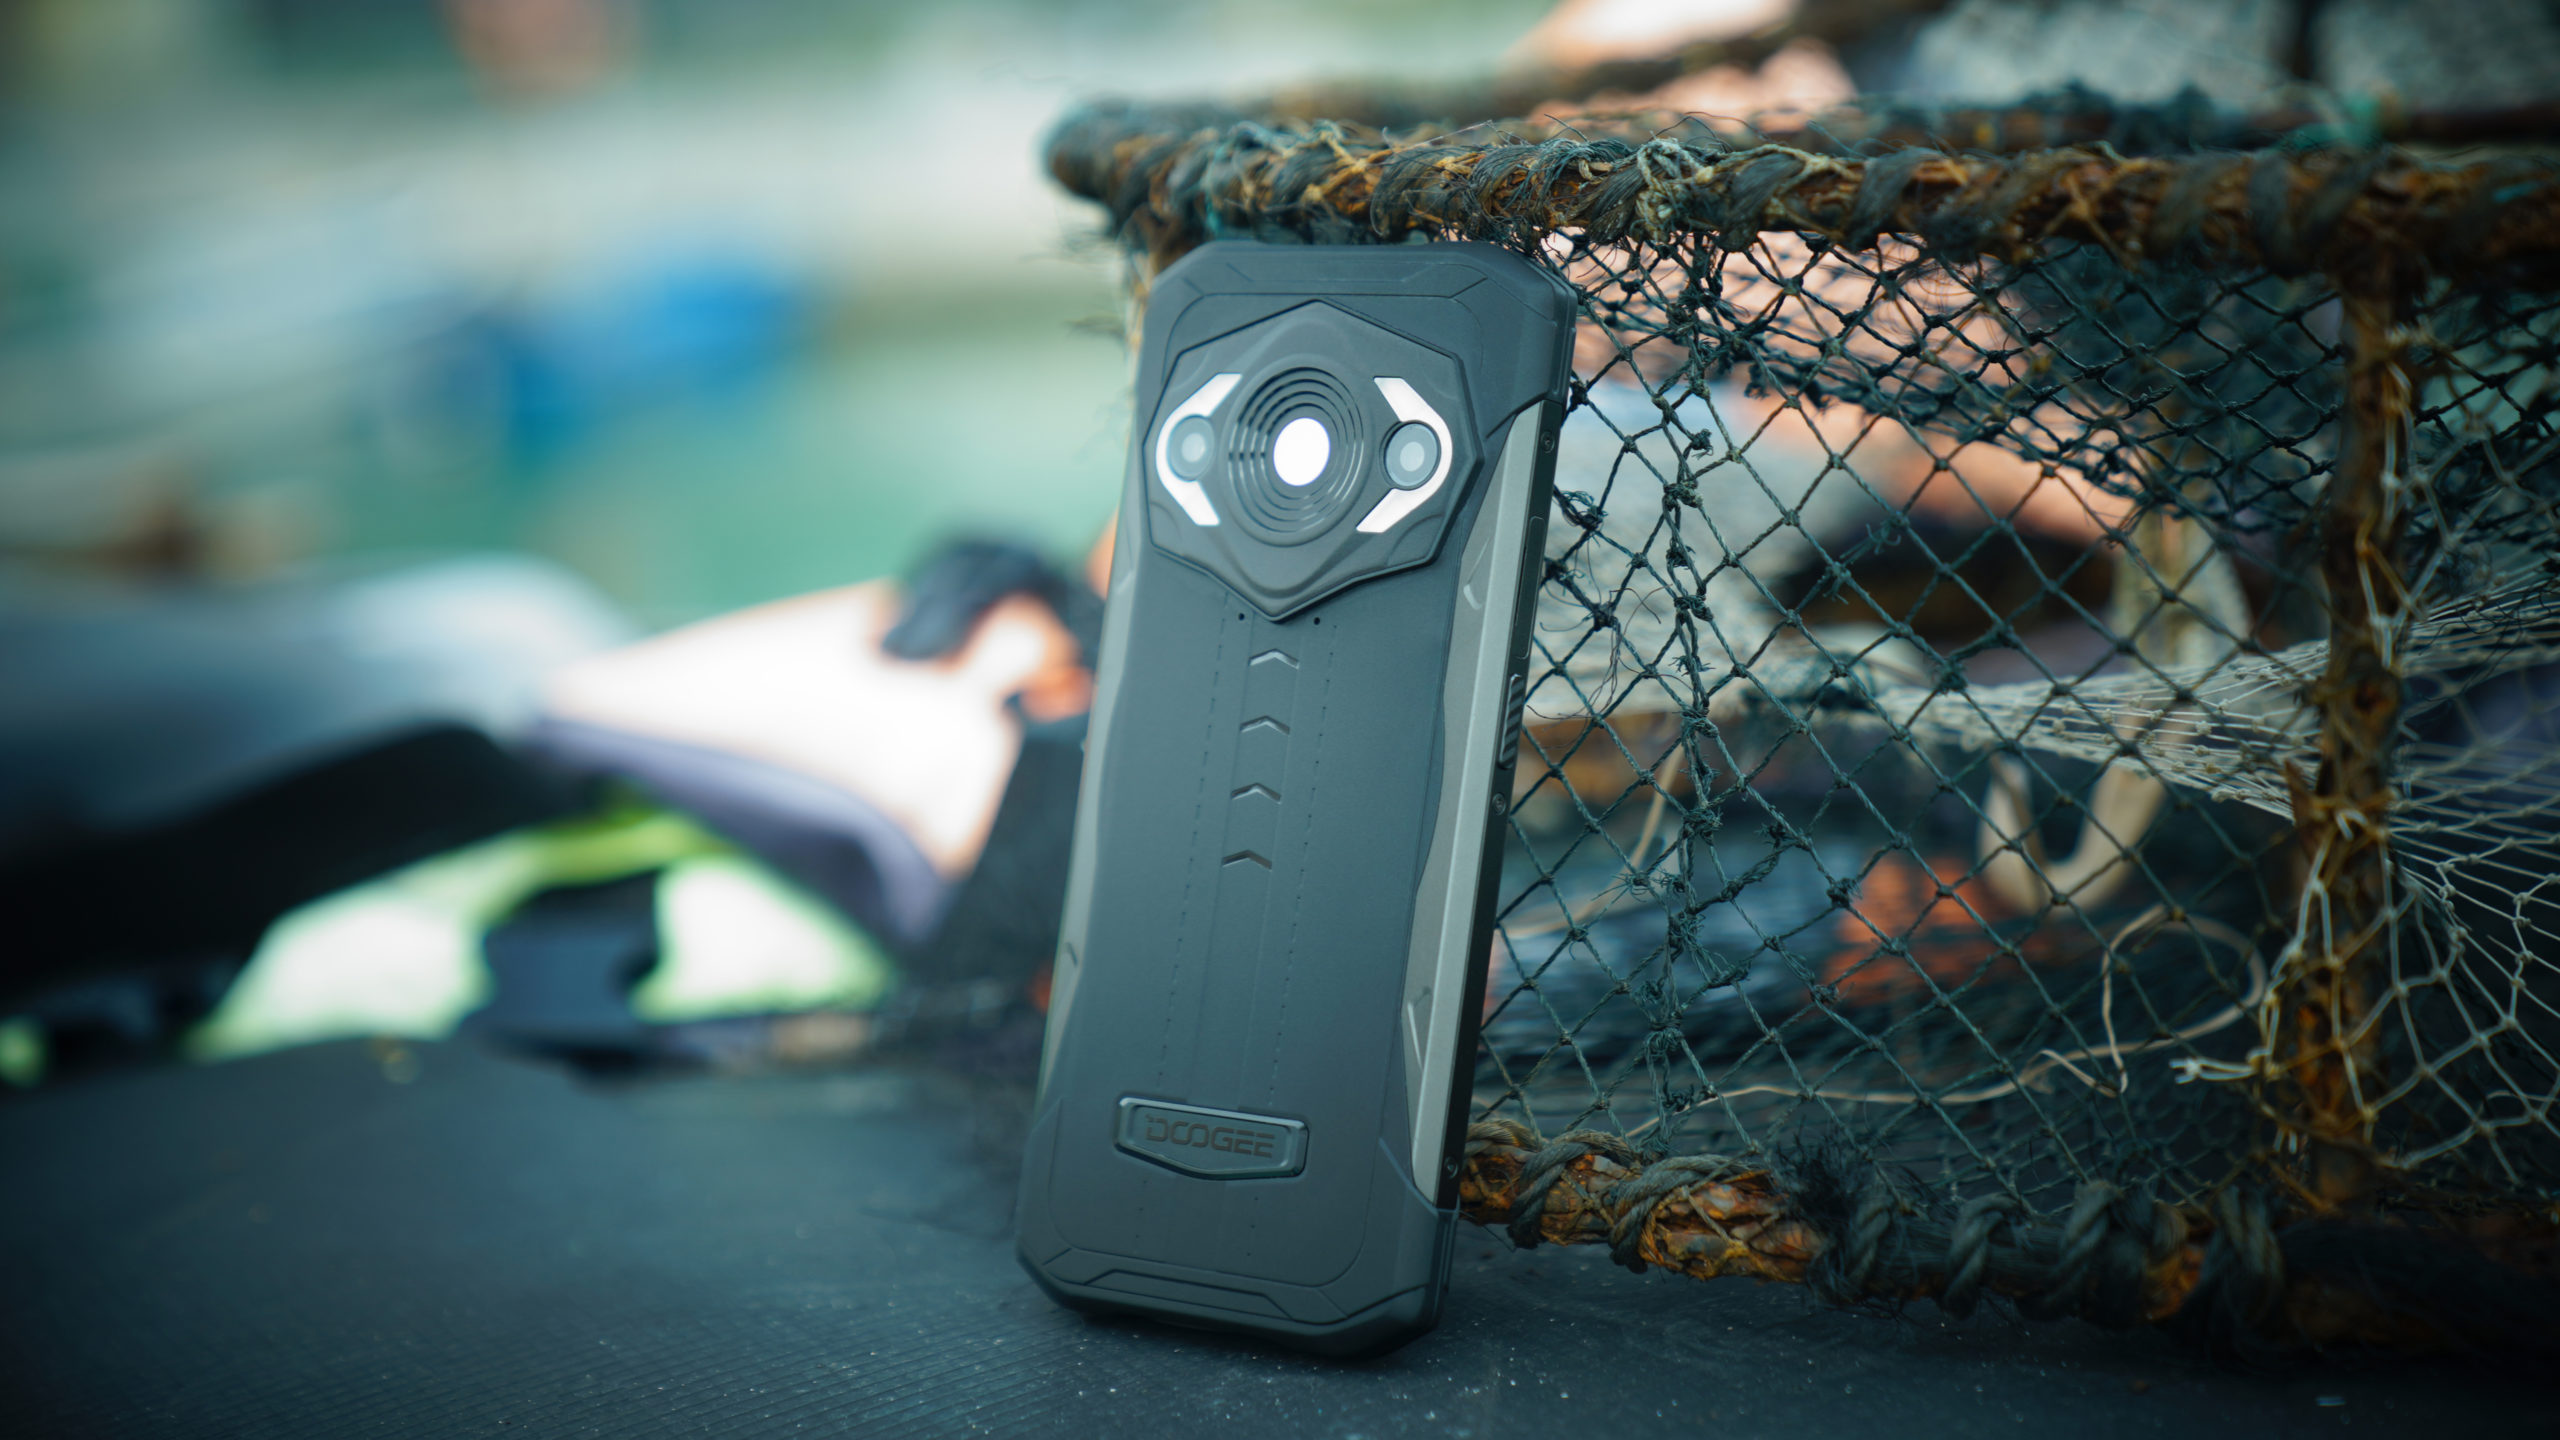 DooGee Announce A Pro Version of the S98 Rugged Phone.